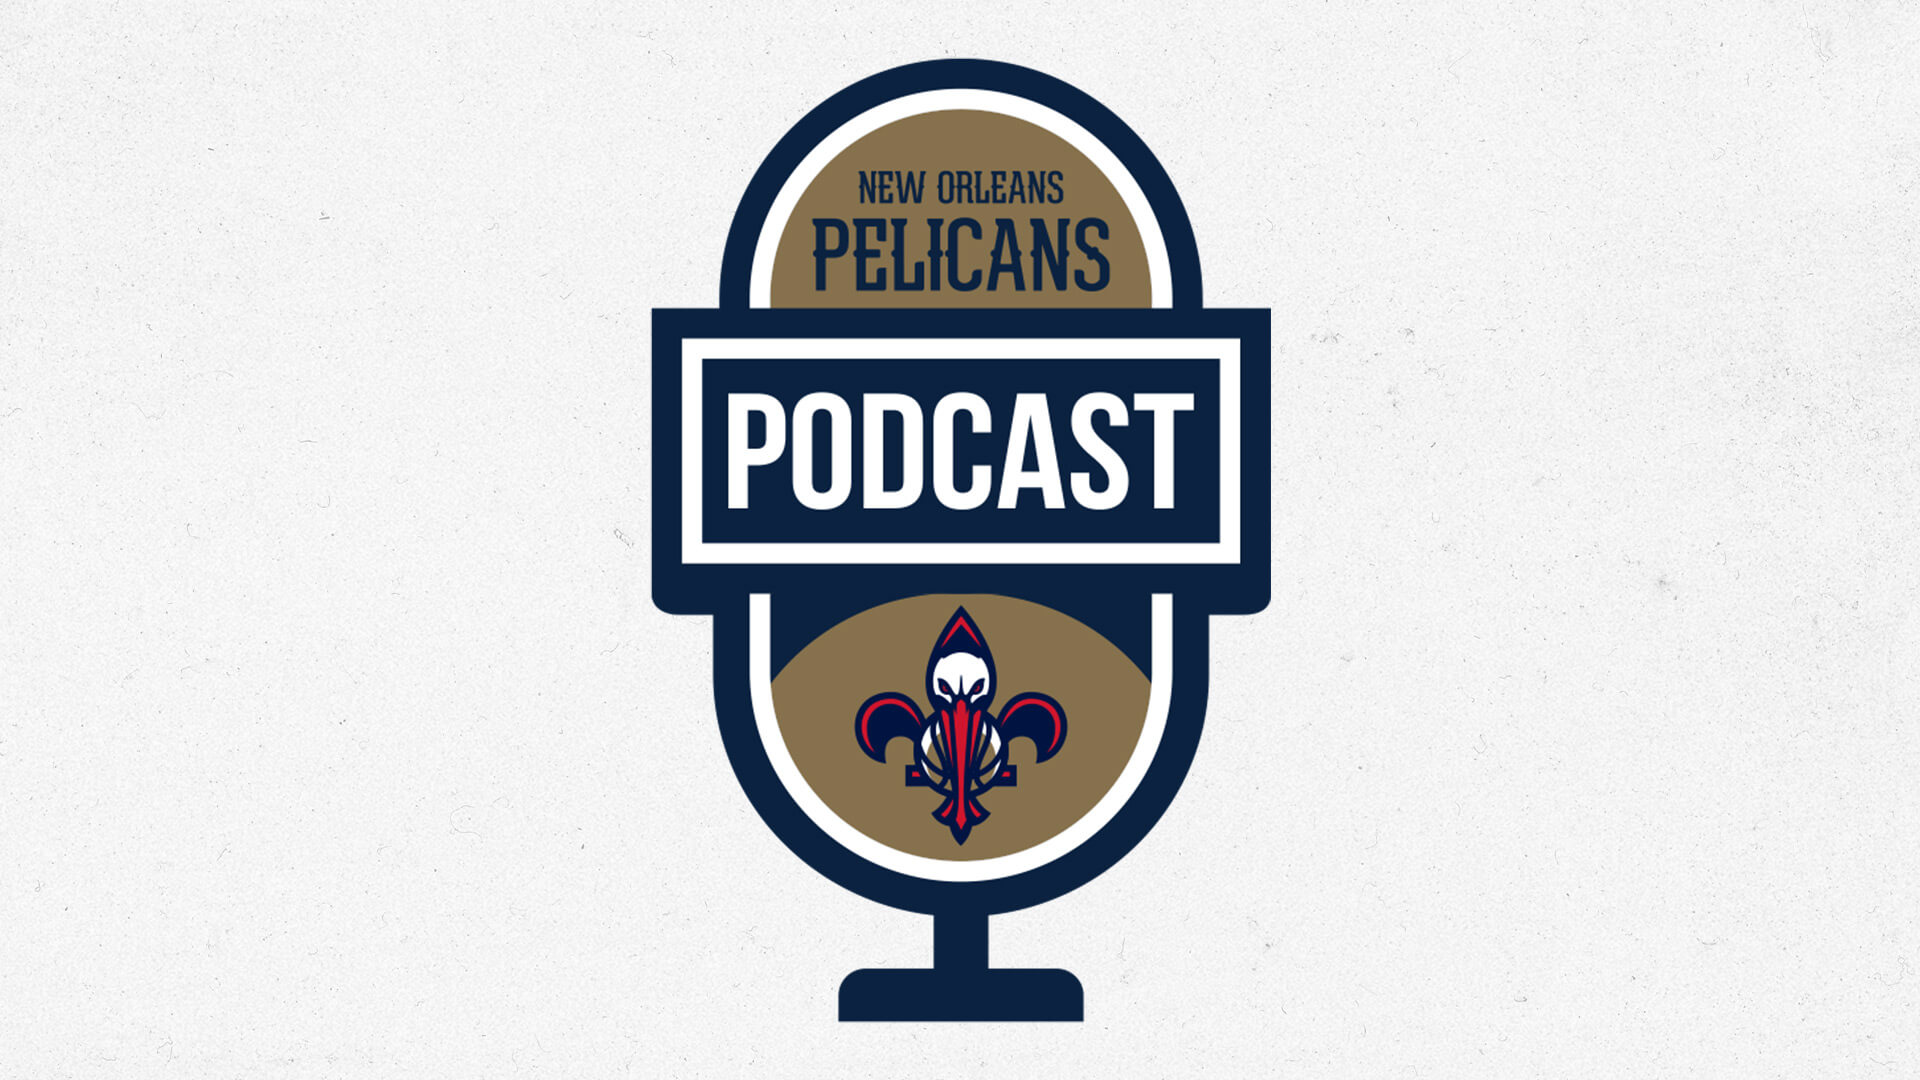 Will Guillory on Zion Williamson's emergence, Magic & Heat games | Pelicans Podcast